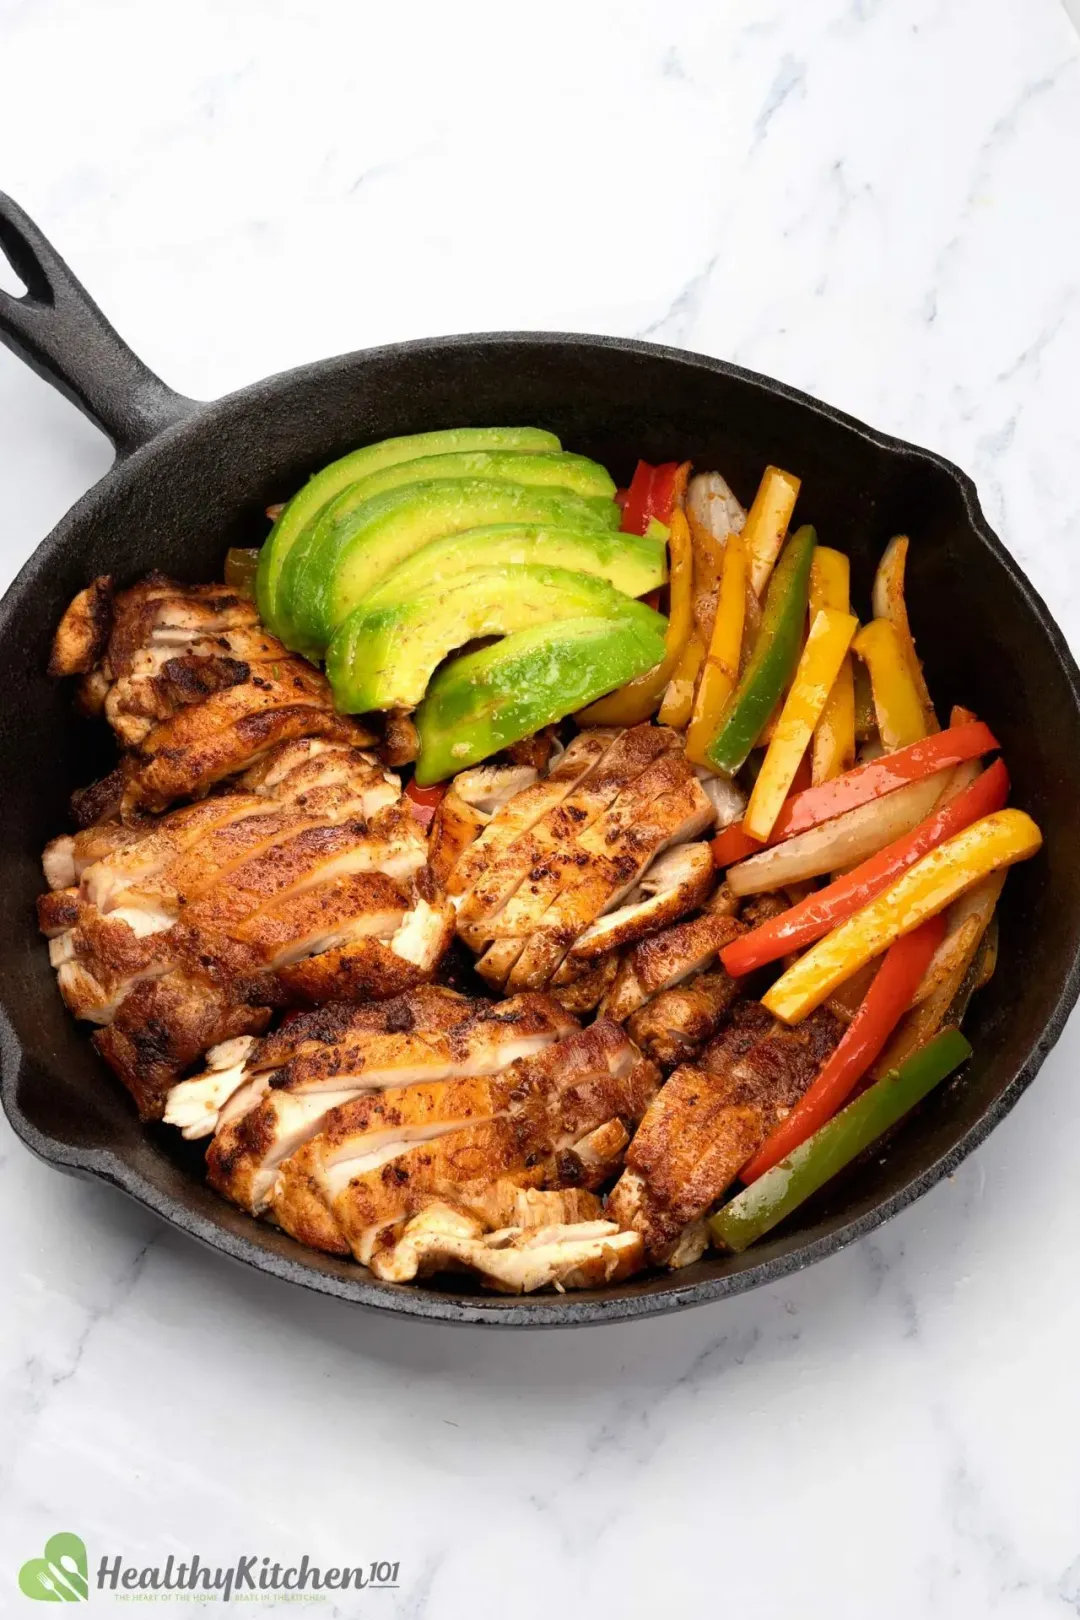 A skillet filled with pan seared chicken slices, bell pepper sticks, and avocado slices